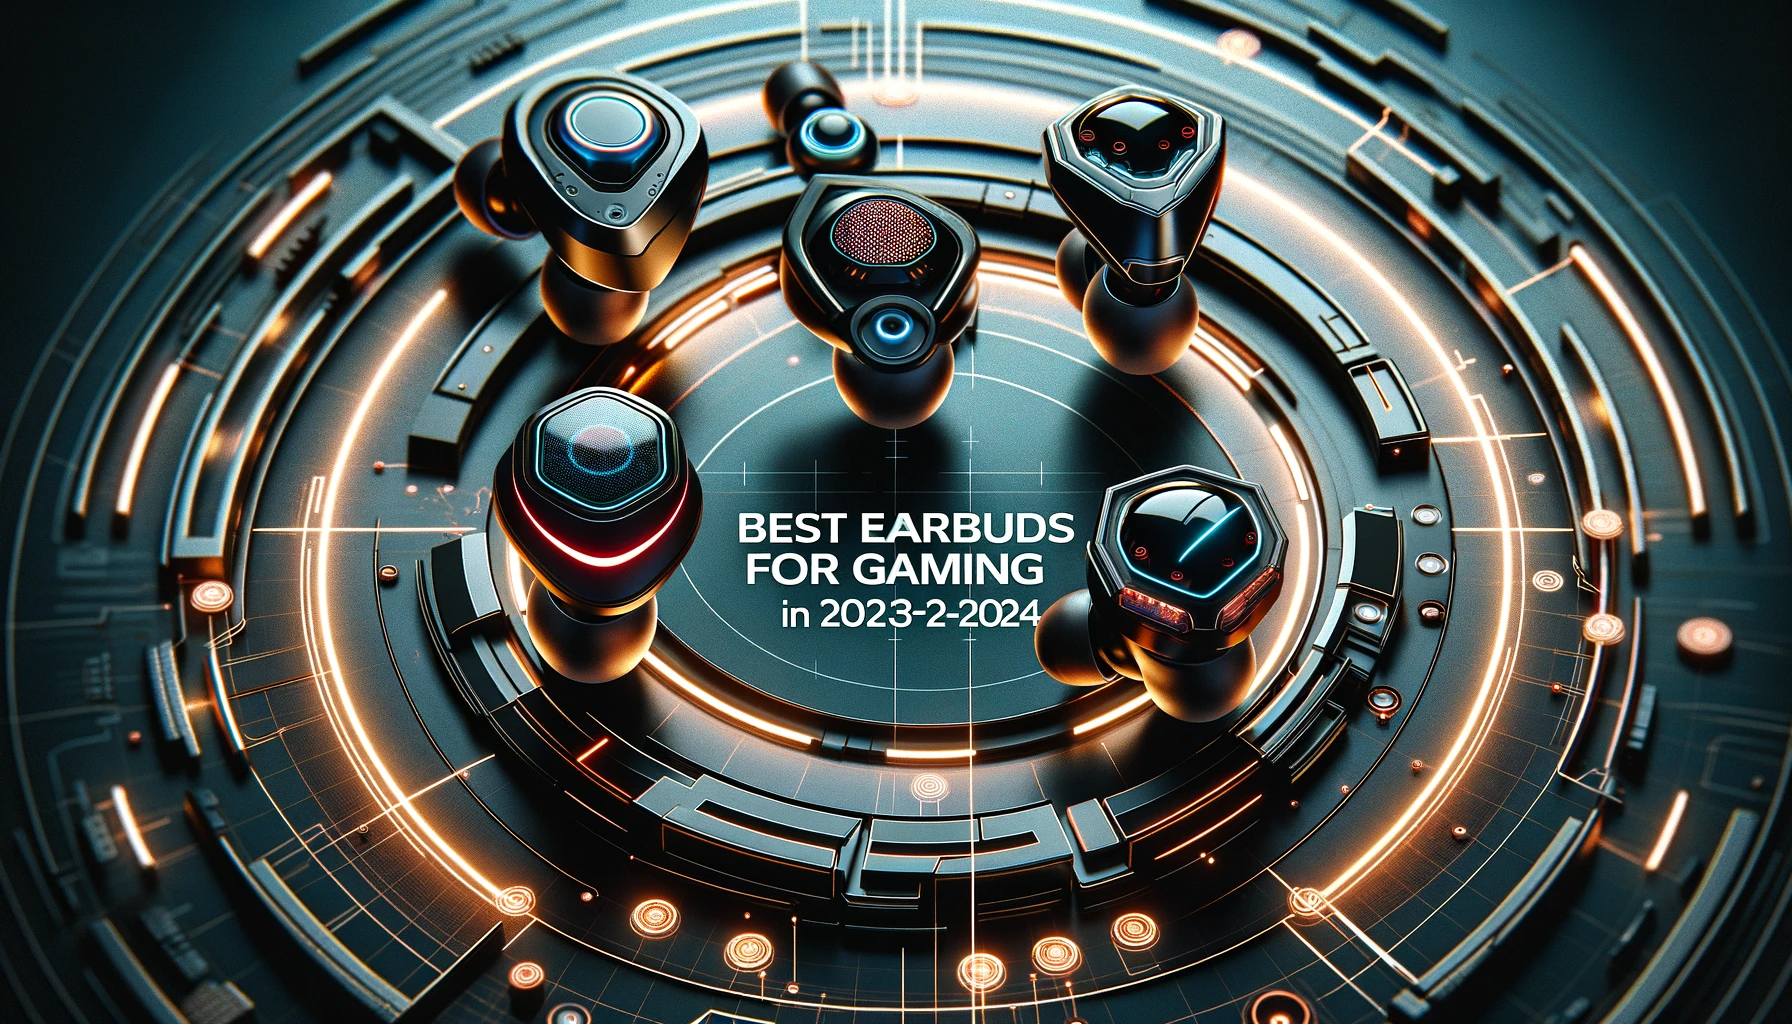 The Best Earbuds For Gaming In 2023-2024